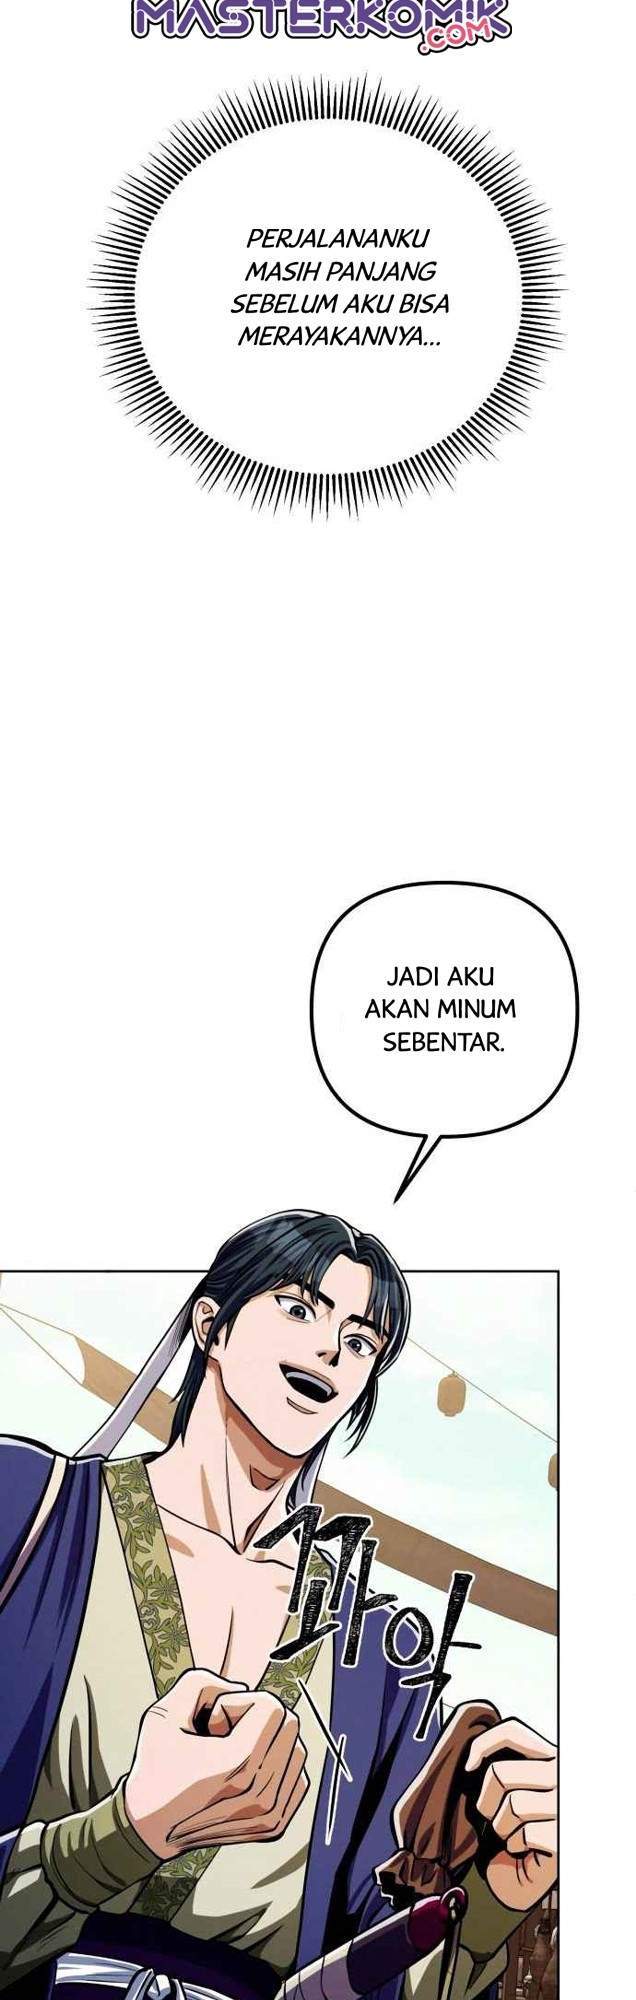 Ha Buk Paeng’s Youngest Son Chapter 8 60